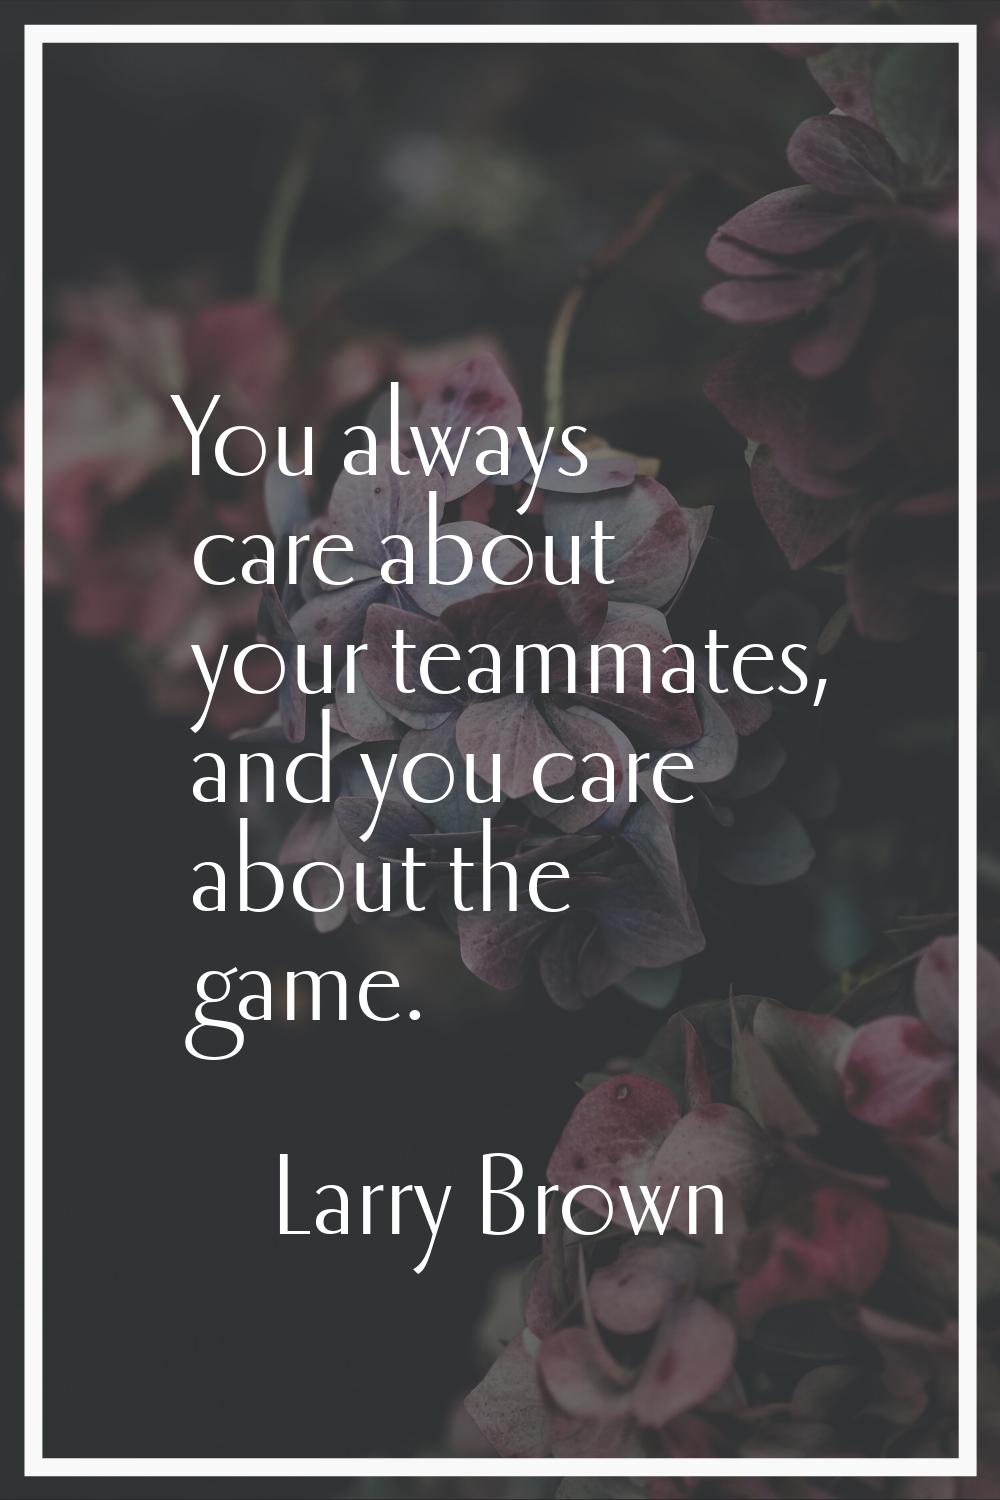 You always care about your teammates, and you care about the game.